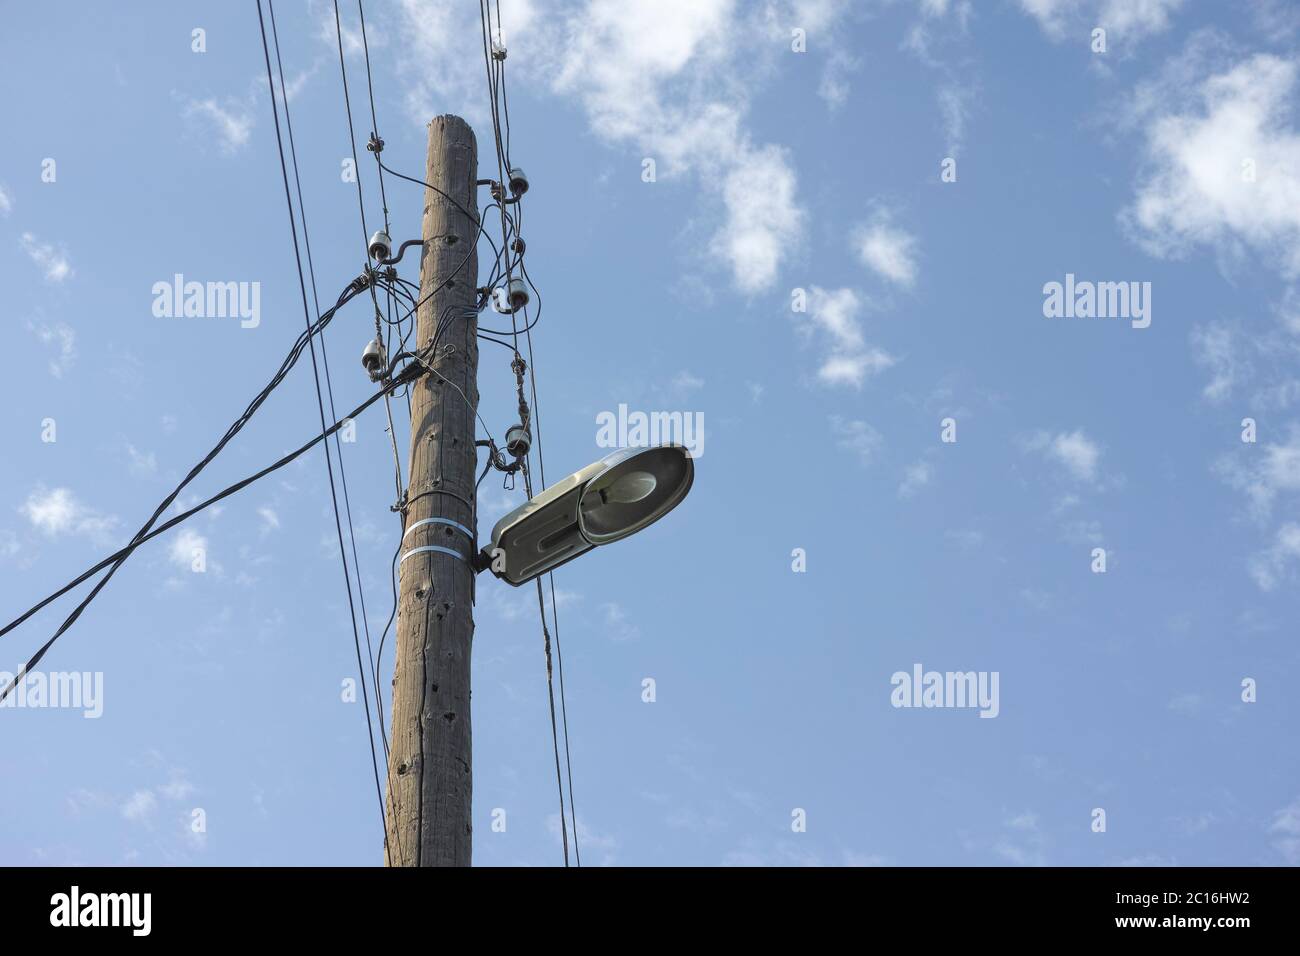 An old electric wooden pole with a lamp and electricity cables hanging on. Natural light. Stock Photo